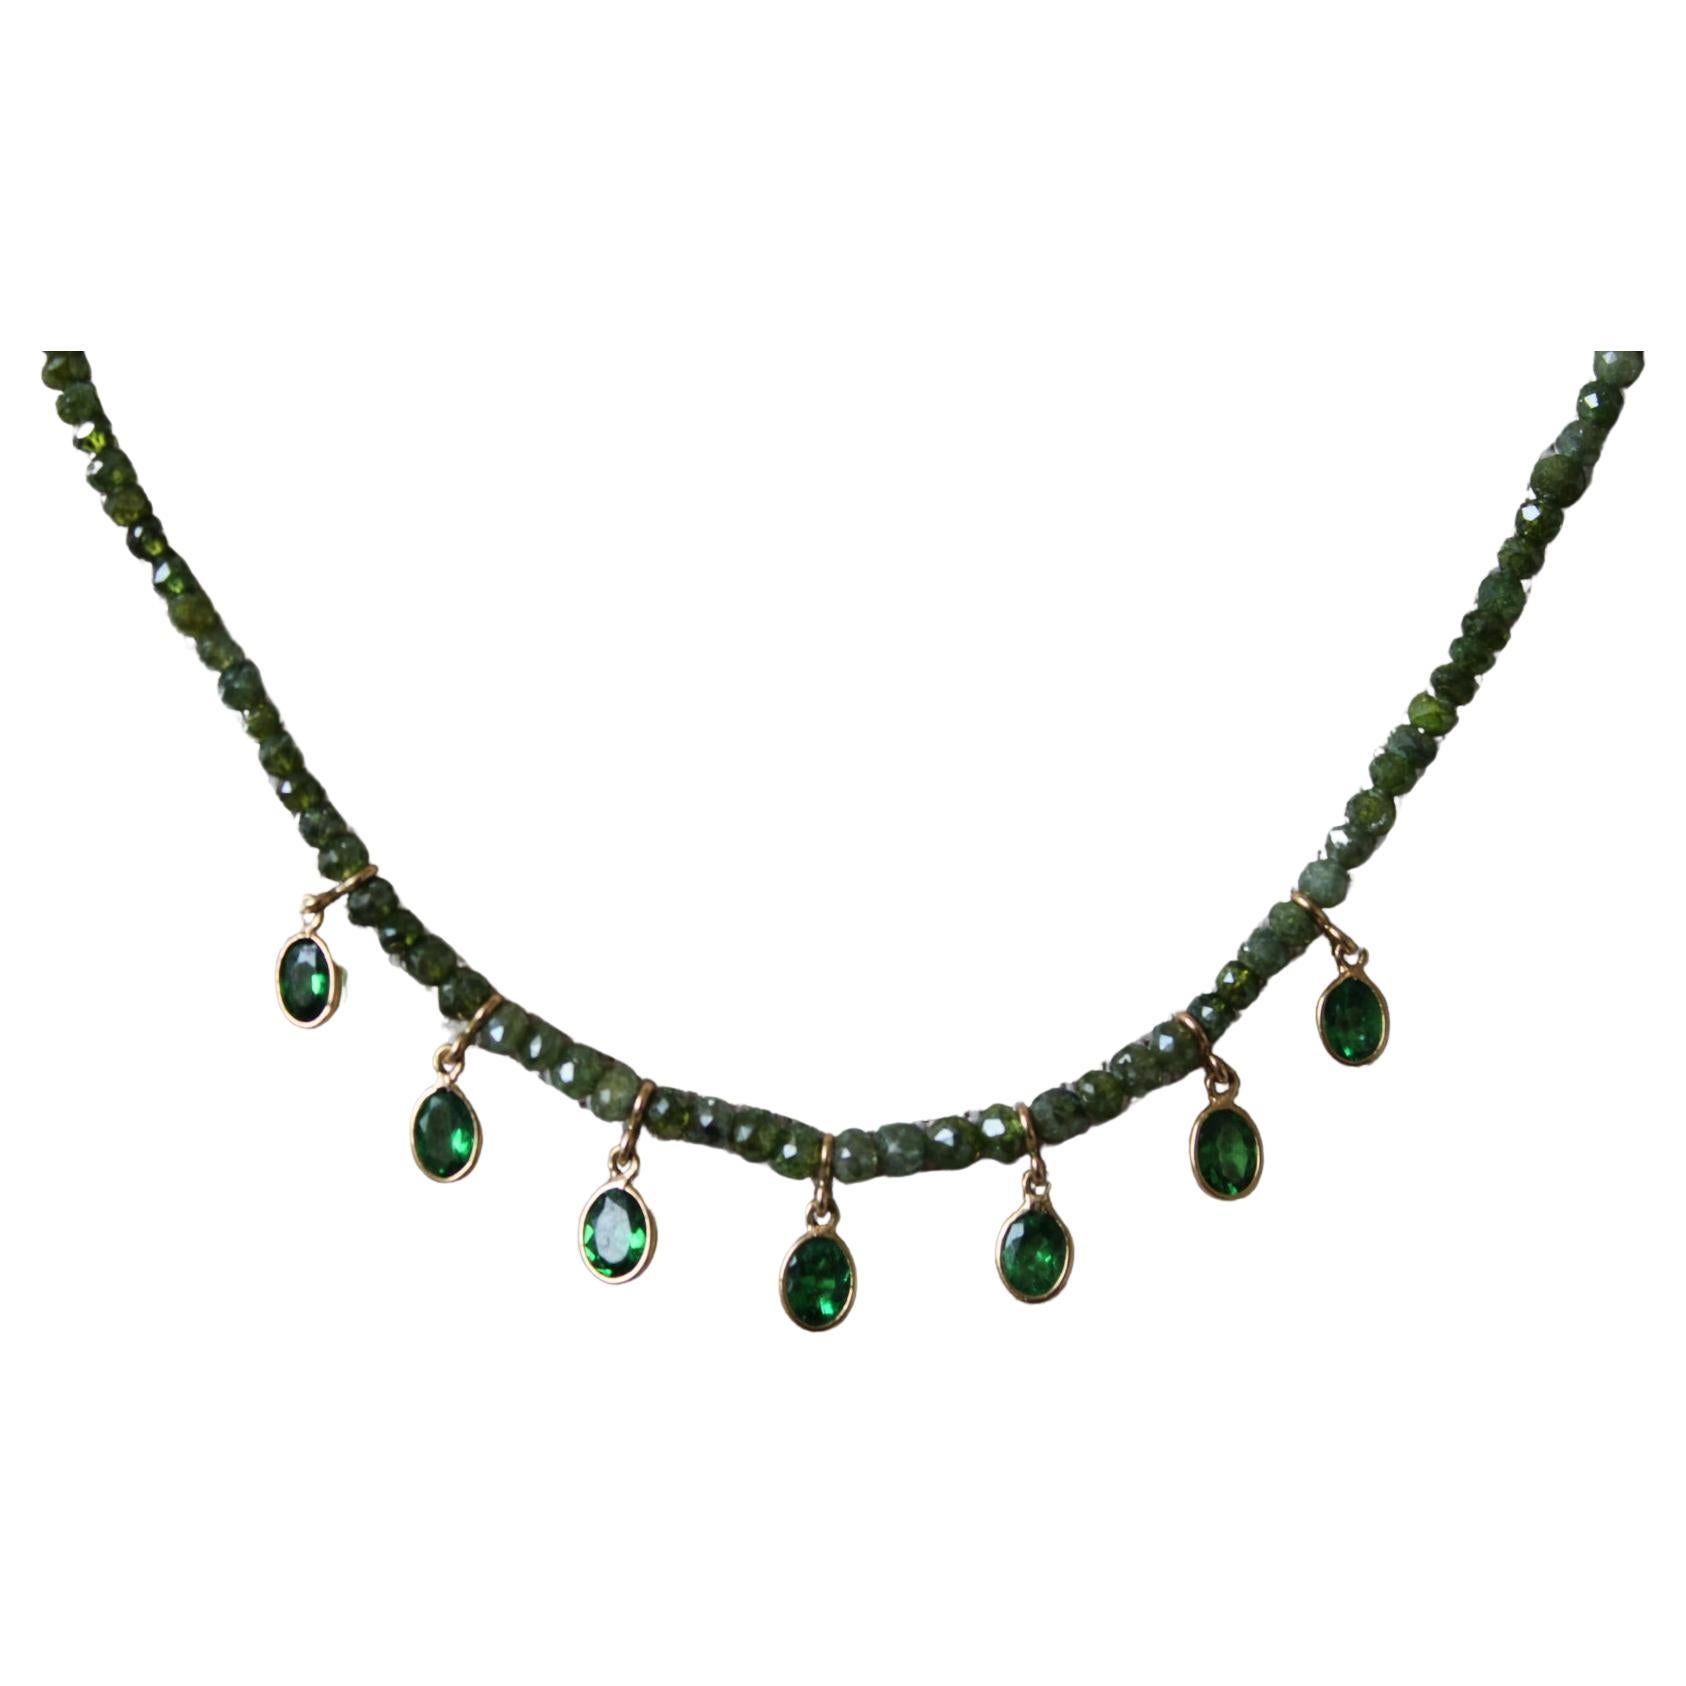 17.22 Carat Diamond Bead Chain in 18K Gold with Tsavorite Pears For Sale